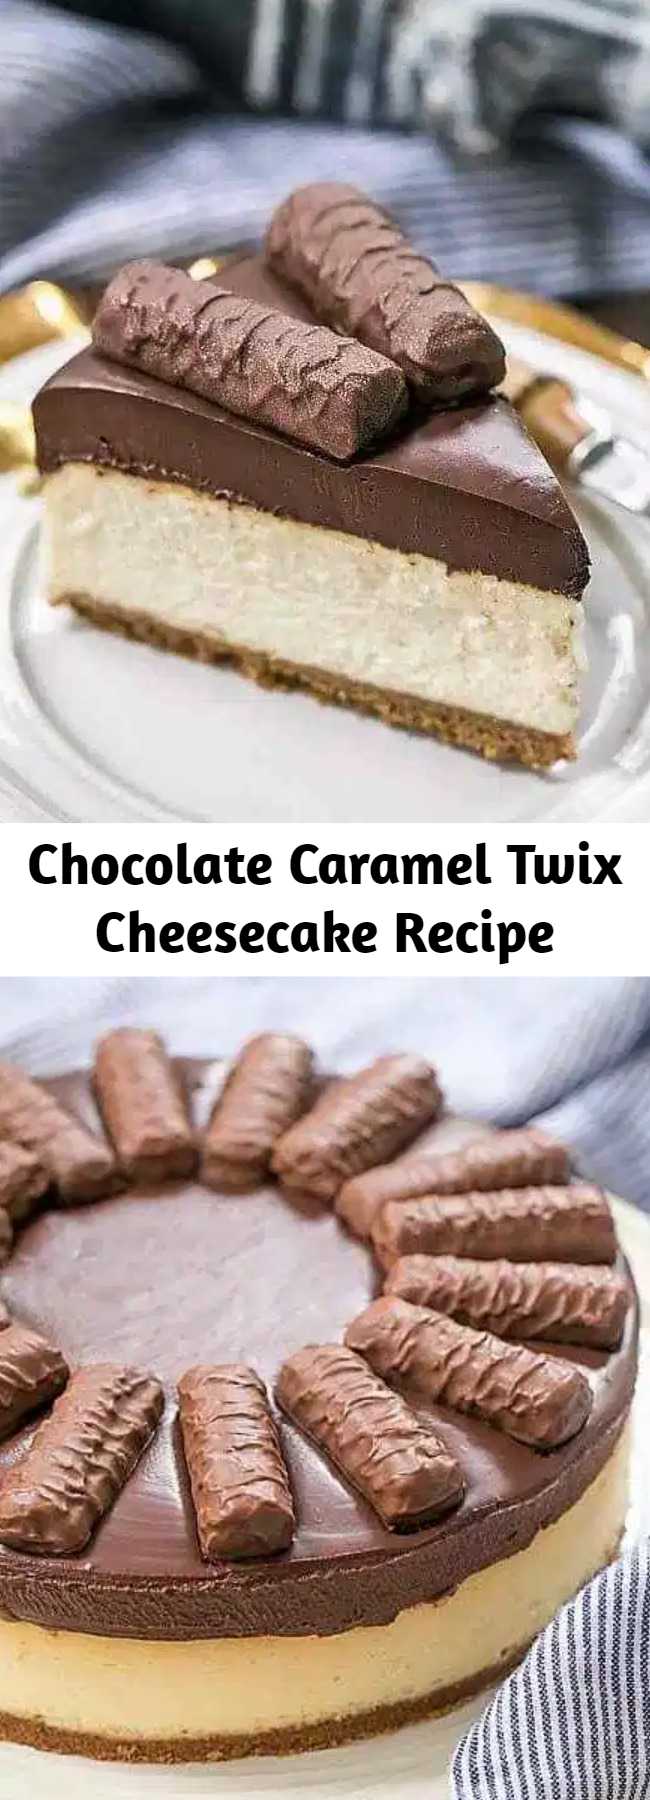 Chocolate Caramel Twix Cheesecake Recipe - A blissful Chocolate Caramel Twix Cheesecake with a dreamy cheesecake topped with a thick, exquisite ganache before a drizzle of buttery caramel sauce! Every bite will make you swoon! #cheesecake #twix #caramel #ganache